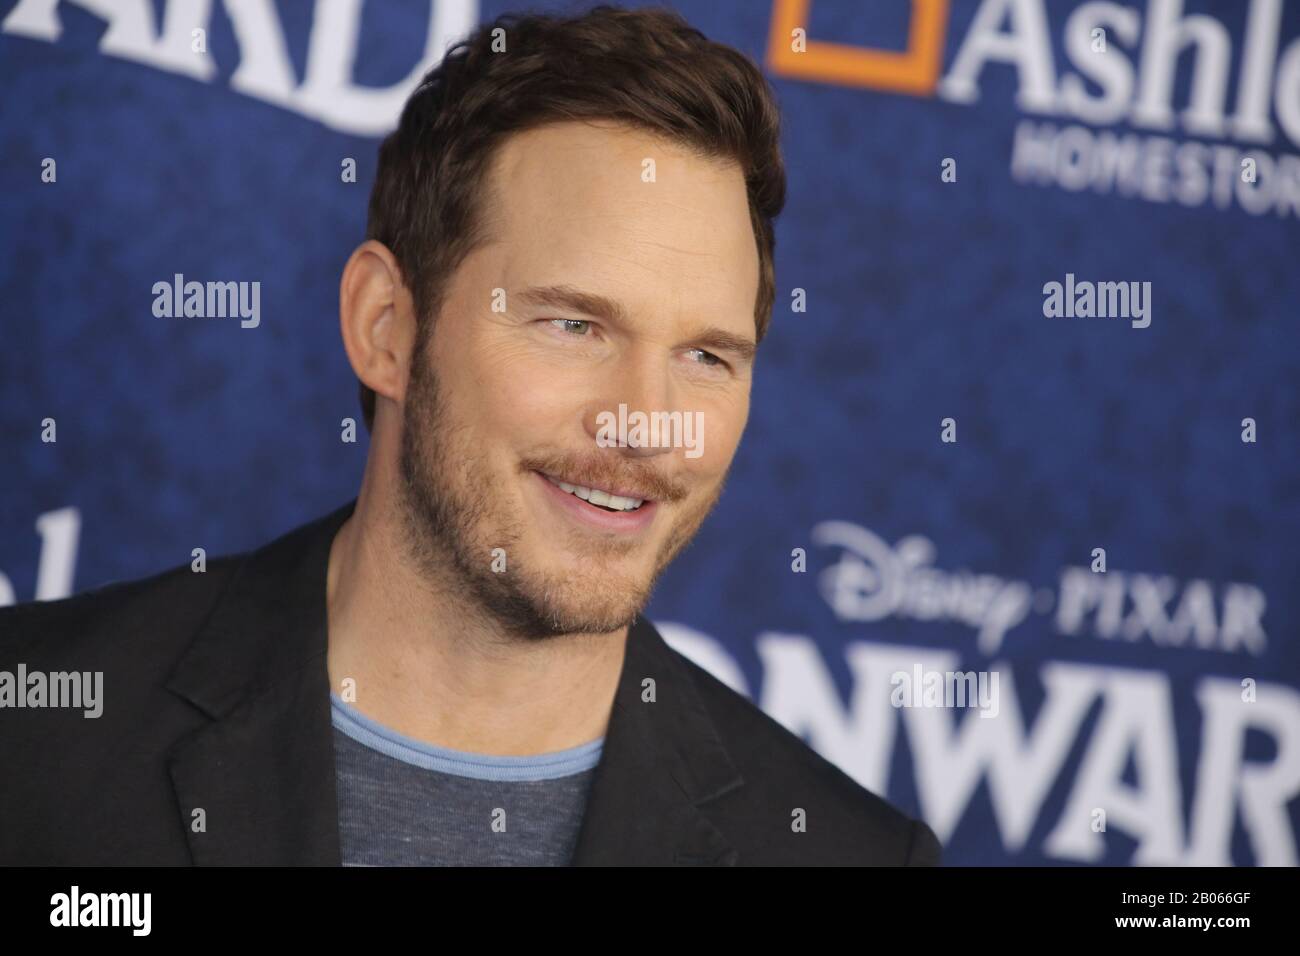 Los Angeles, USA. 18th Feb, 2020. Chris Pratt at "Onward" World Premiere held at El Capitan Theatre in Los Angeles, CA, February 18, 2020. Photo Credit: Joseph Martinez/PictureLux Credit: PictureLux/The Hollywood Archive/Alamy Live News Stock Photo